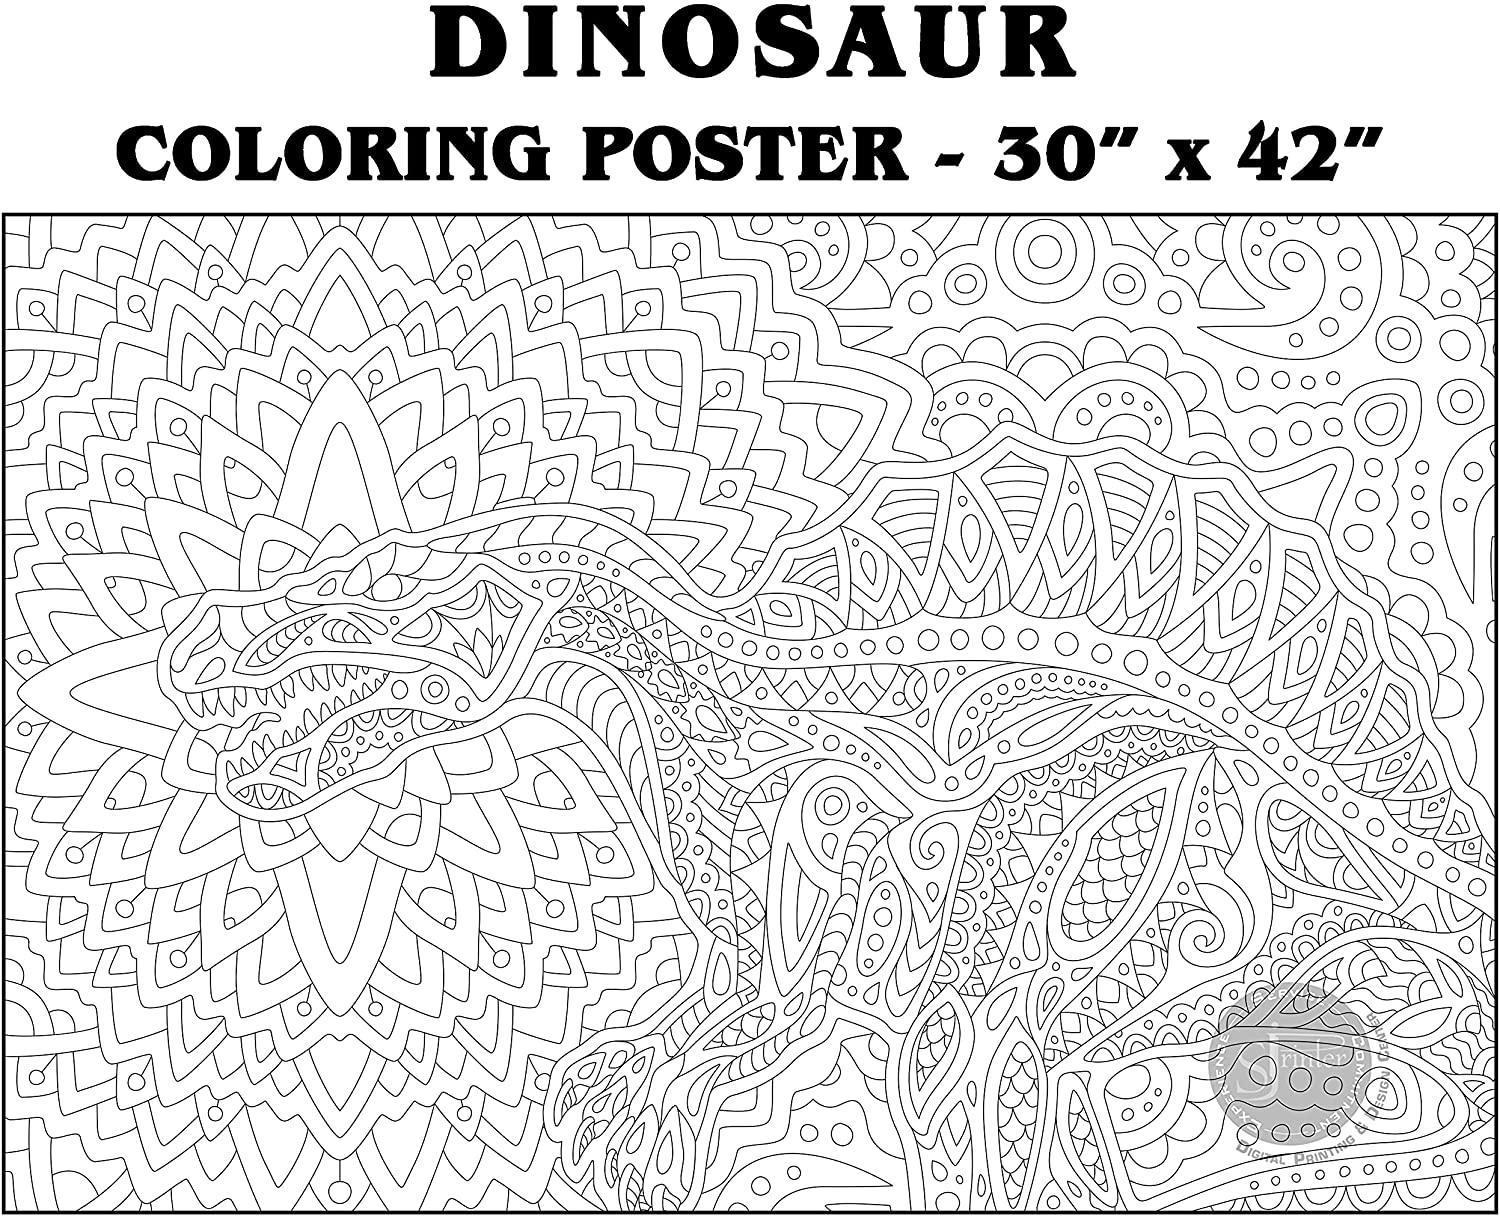 Get coloring posters for kids & adults at SJPrinter Store